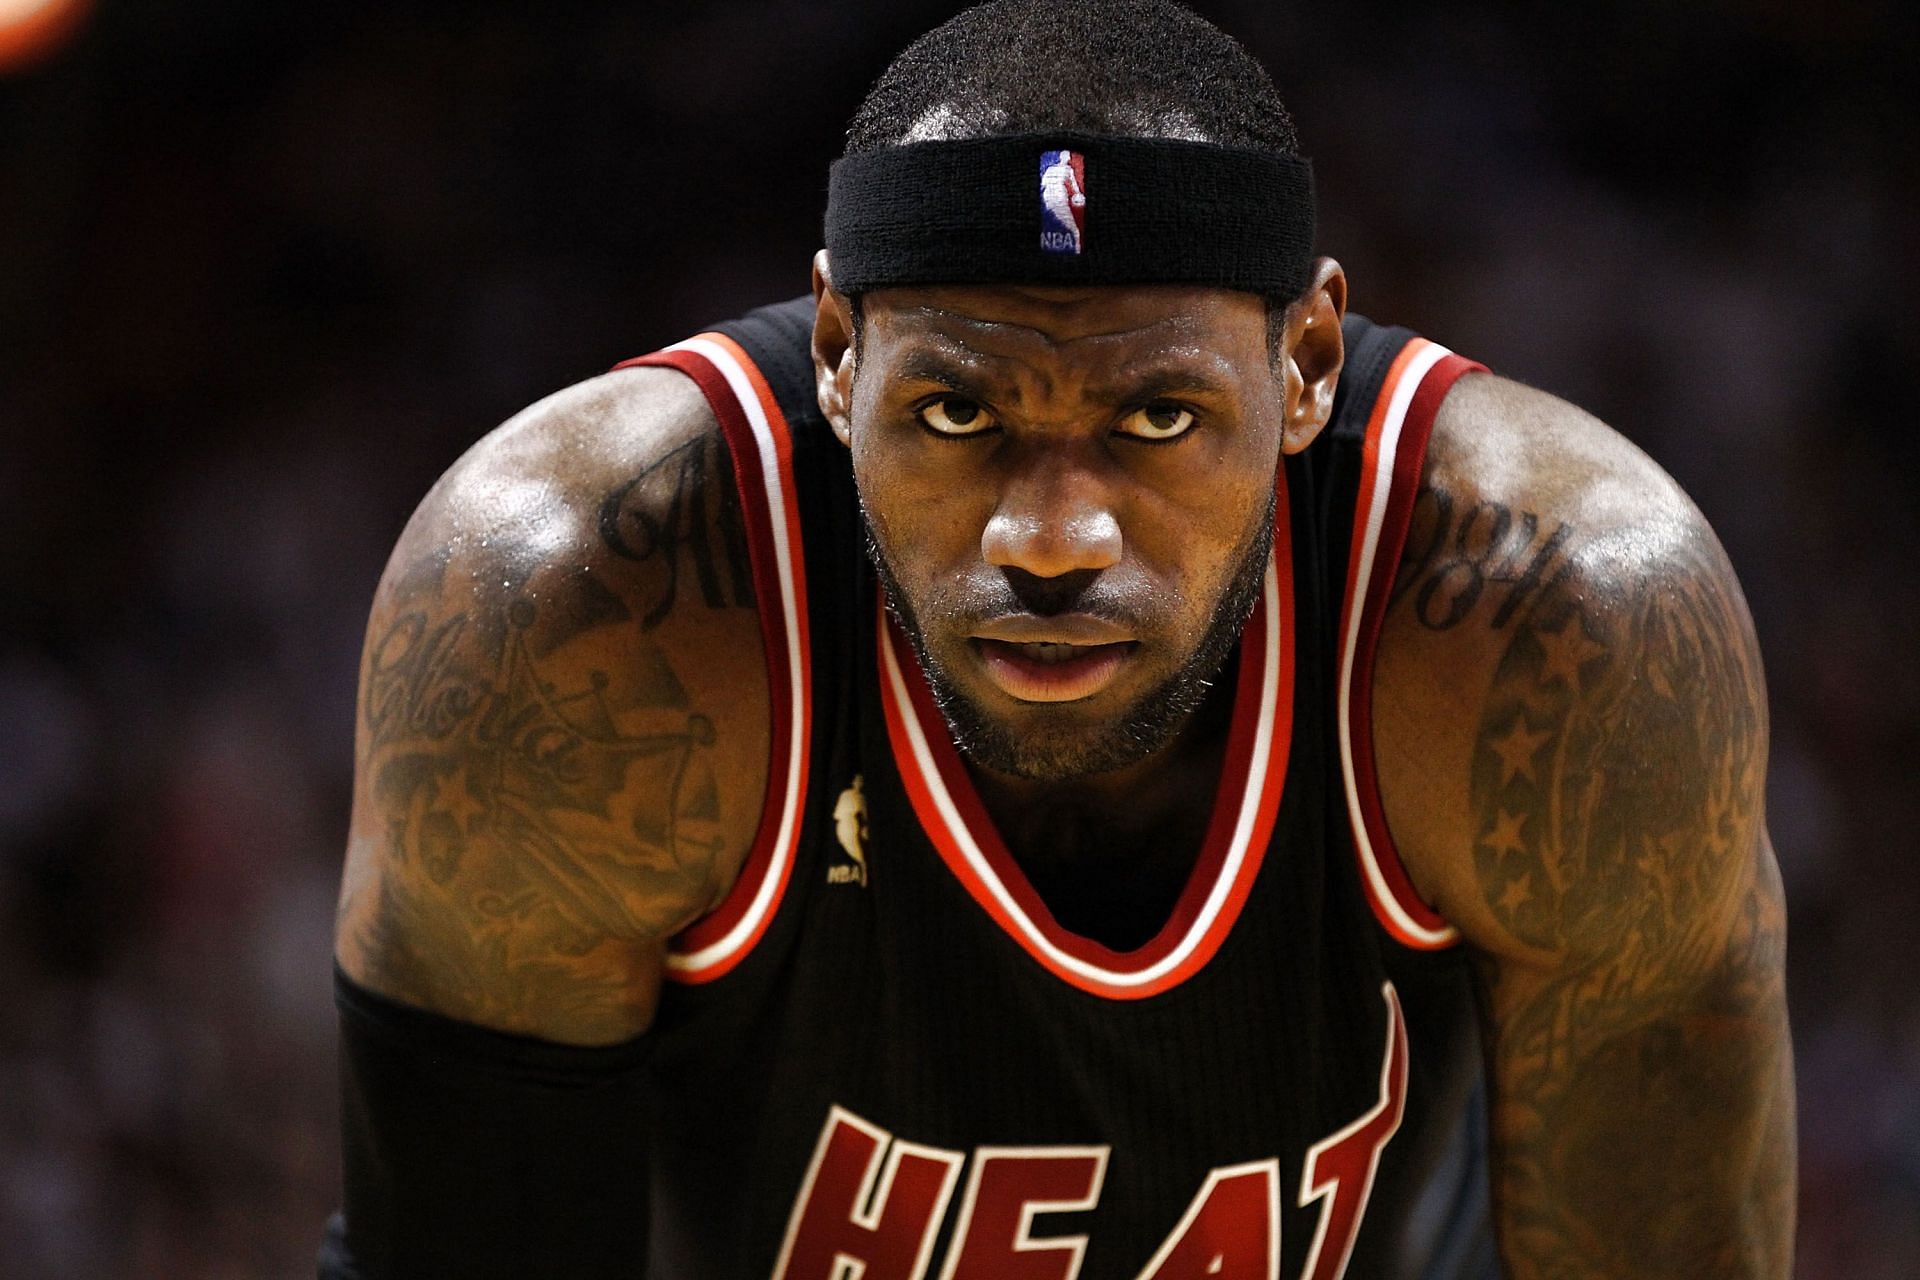 Although it was the final year in Miami, LeBron James still showed his dominance on the court